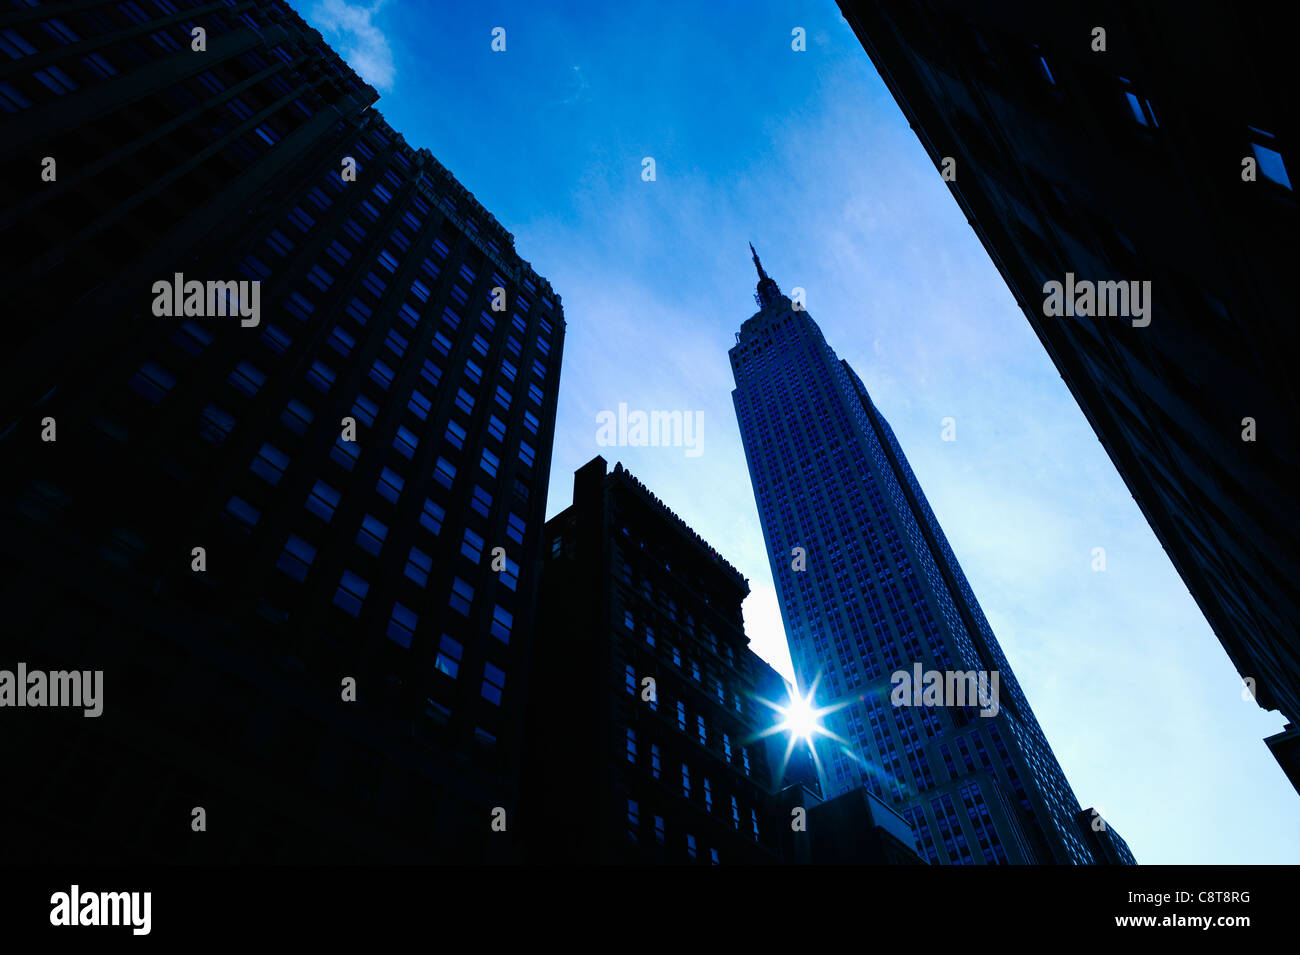 USA, New York City, Empire State Building with solar flare Stock Photo